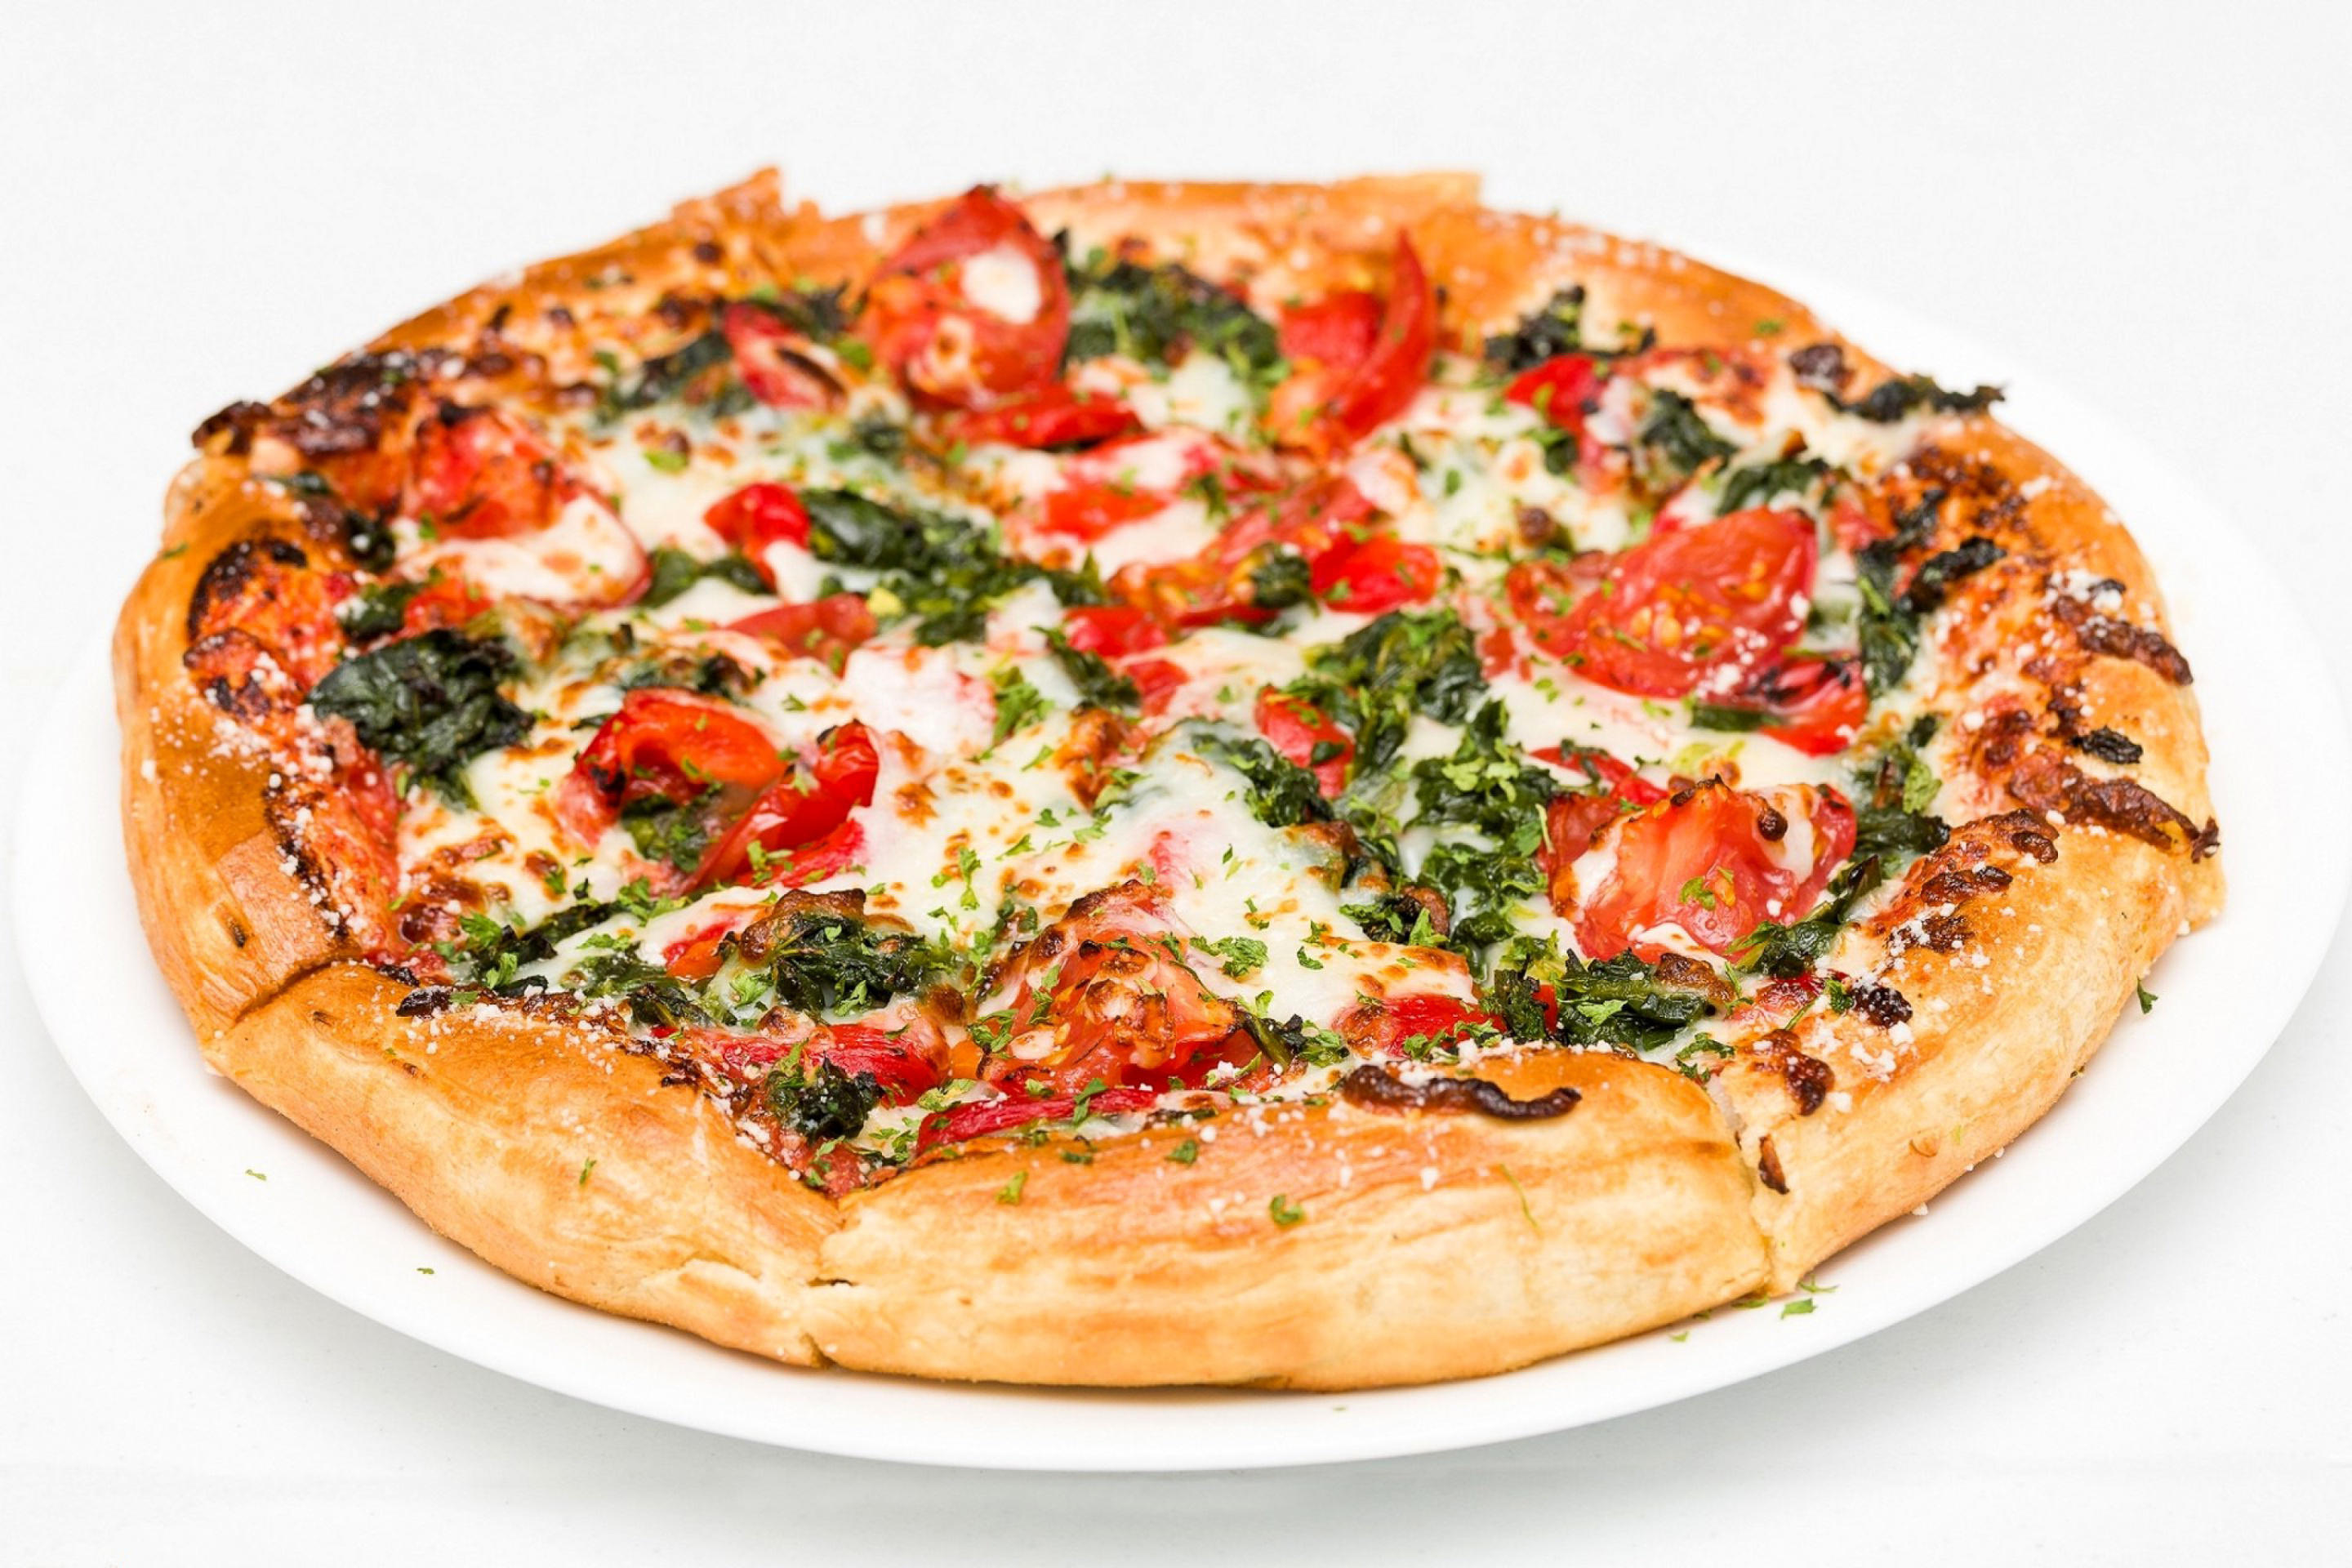 Das Pizza with spinach Wallpaper 2880x1920